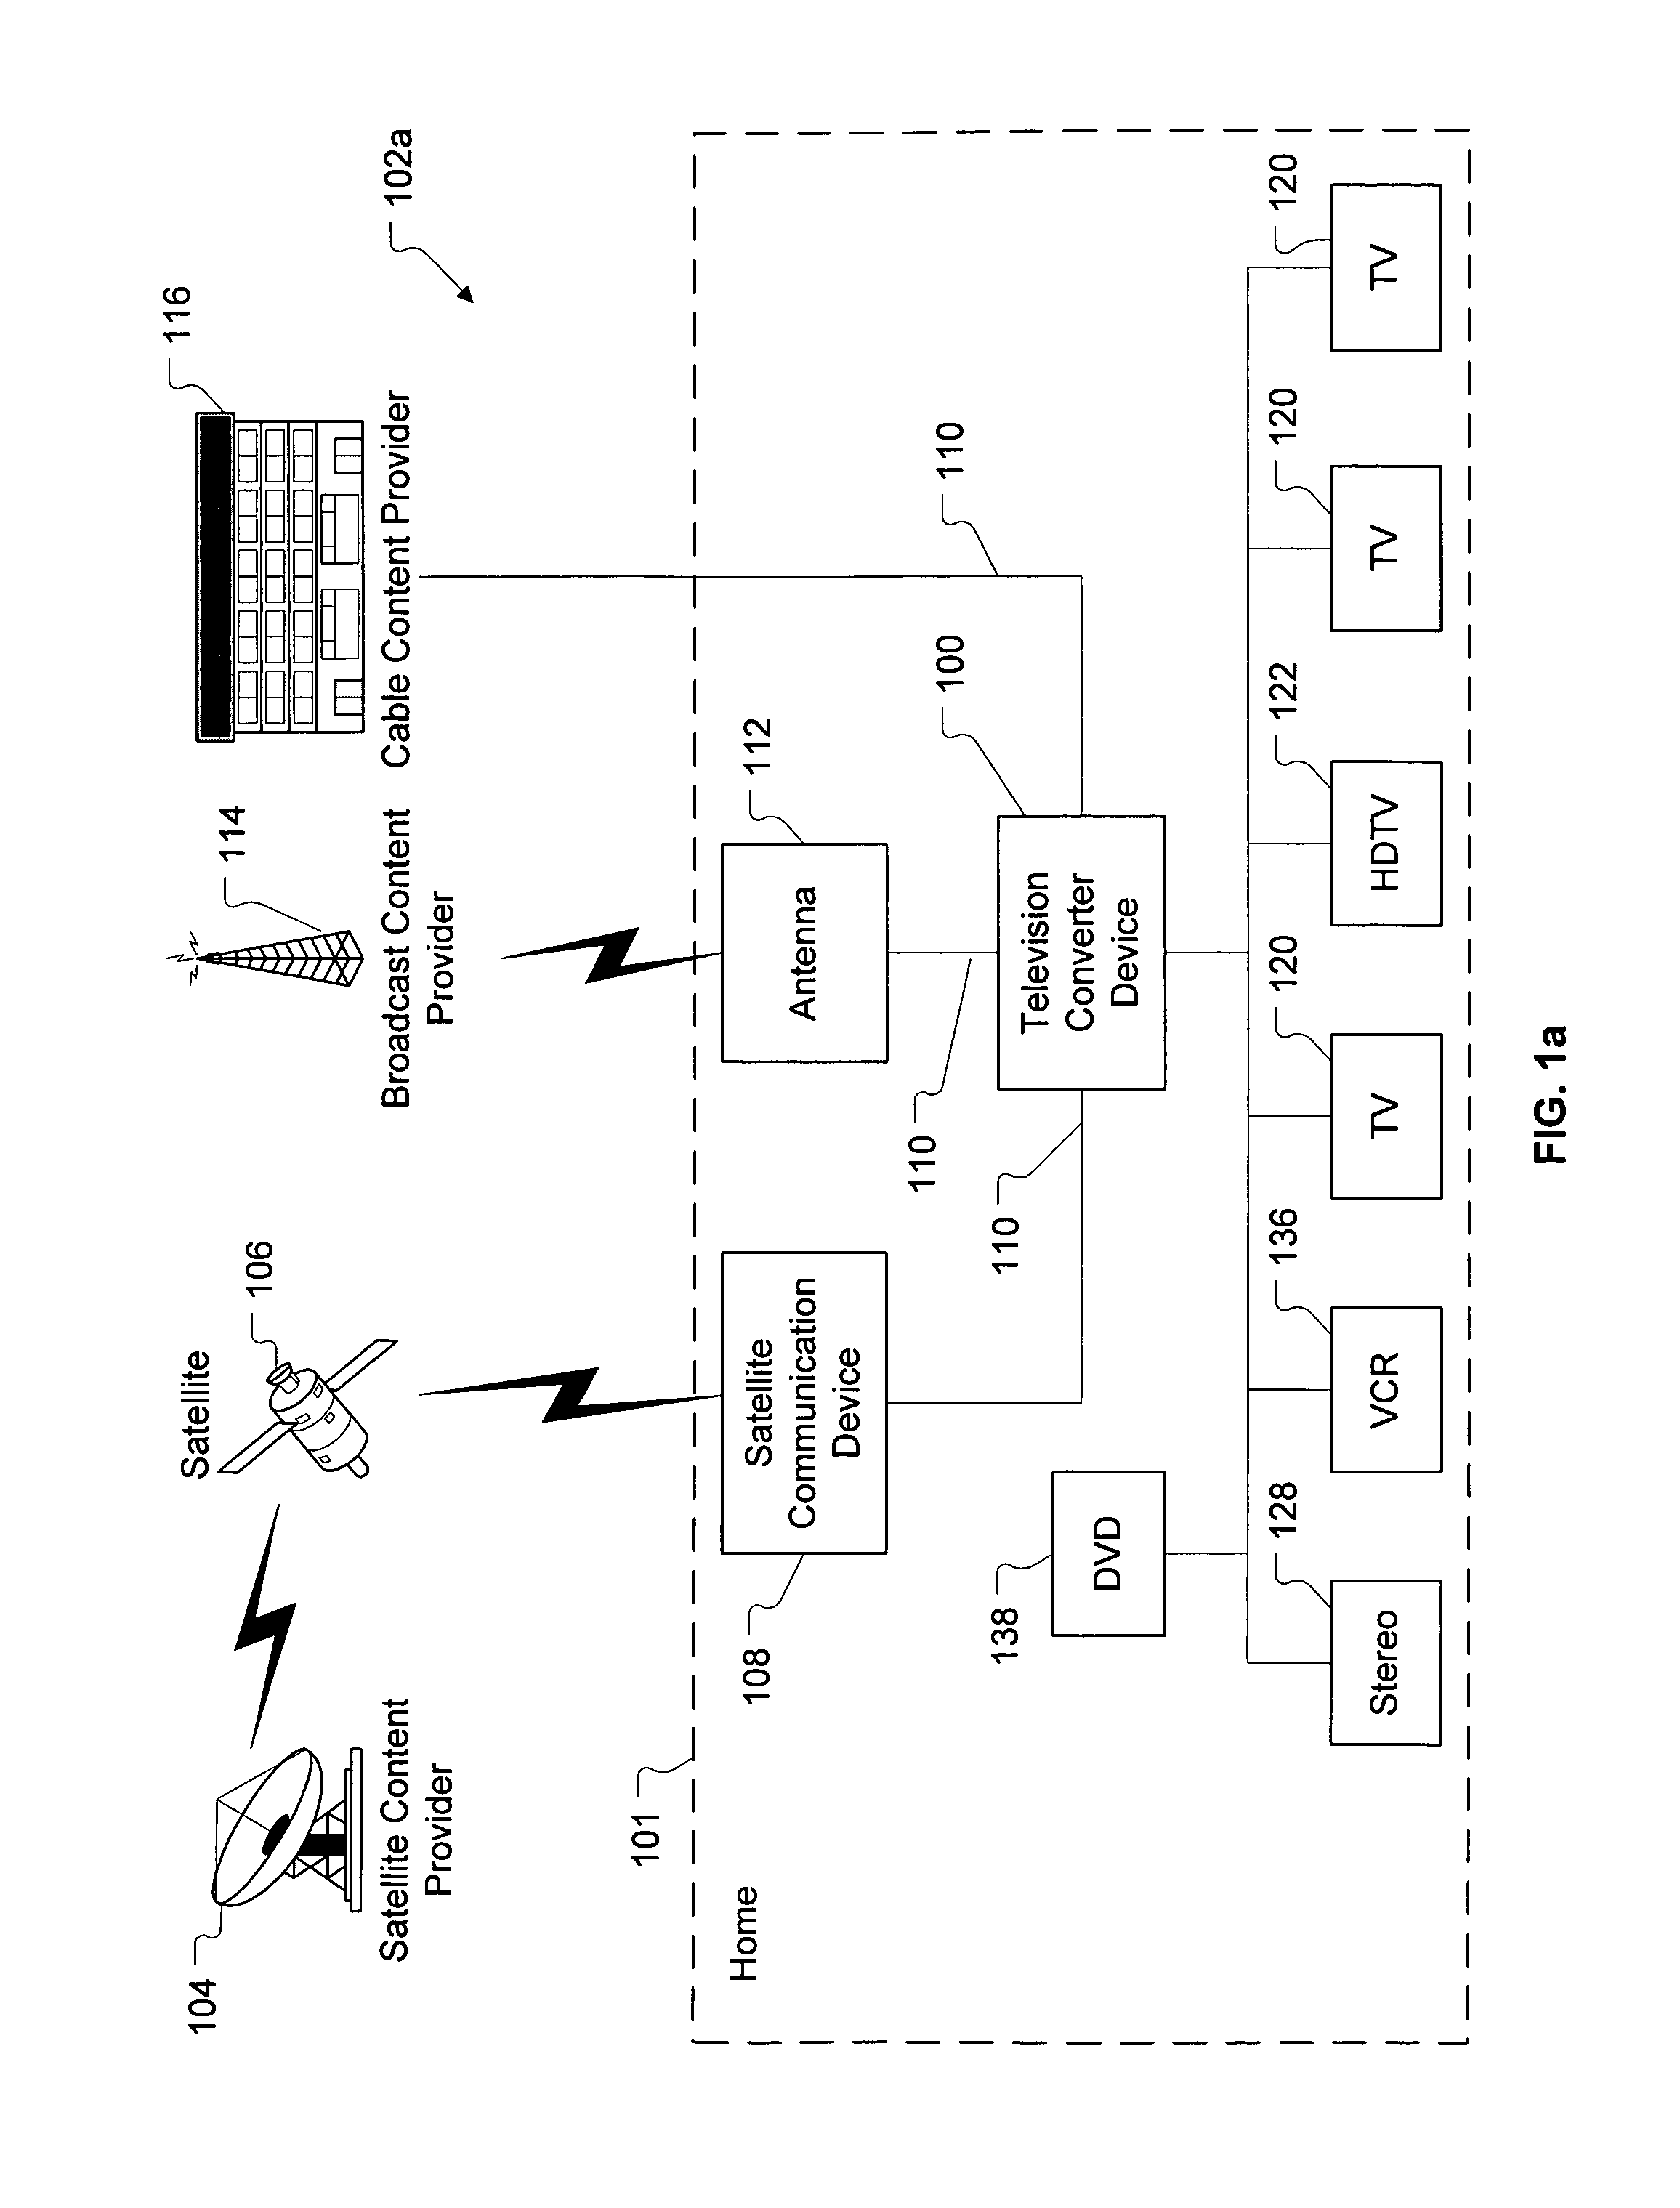 Method and apparatus for parental control